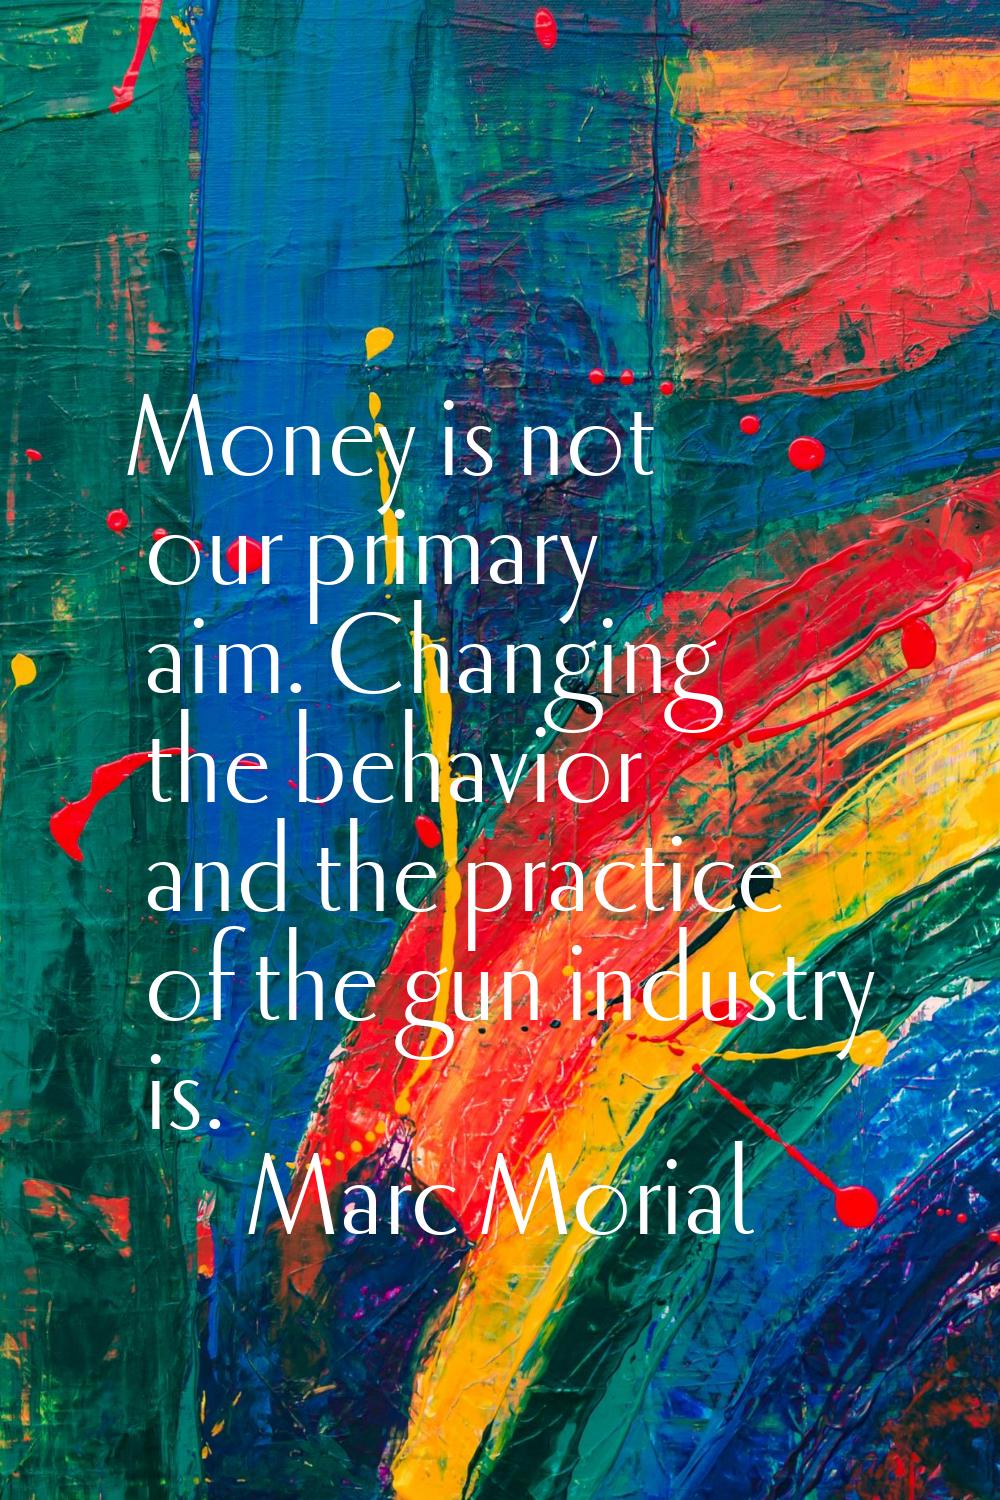 Money is not our primary aim. Changing the behavior and the practice of the gun industry is.